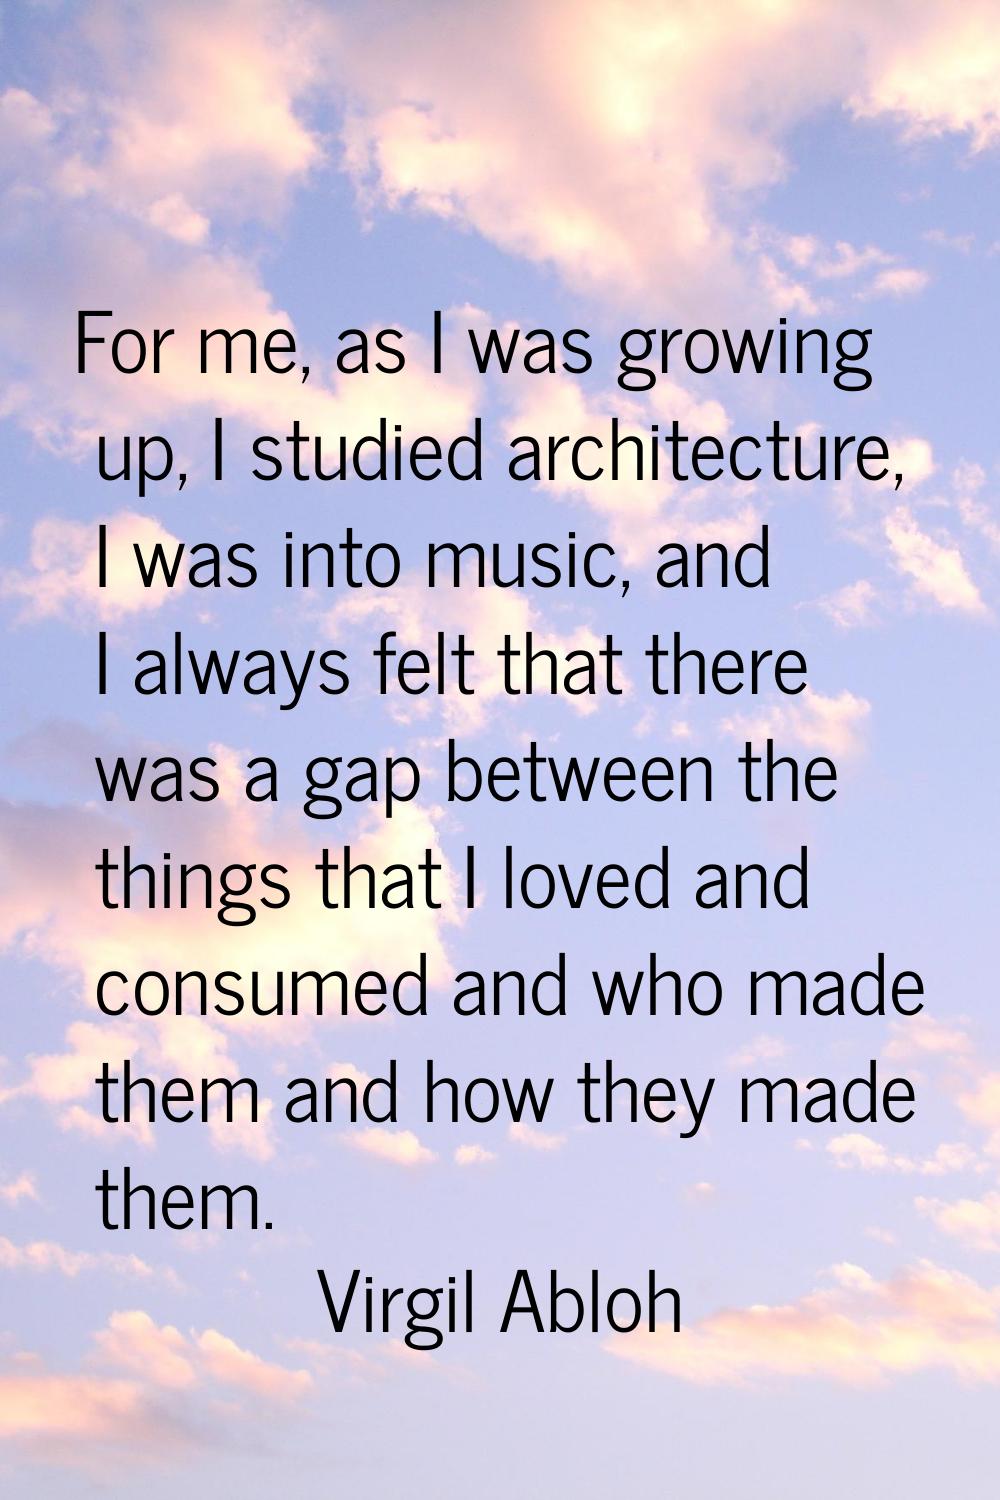 For me, as I was growing up, I studied architecture, I was into music, and I always felt that there